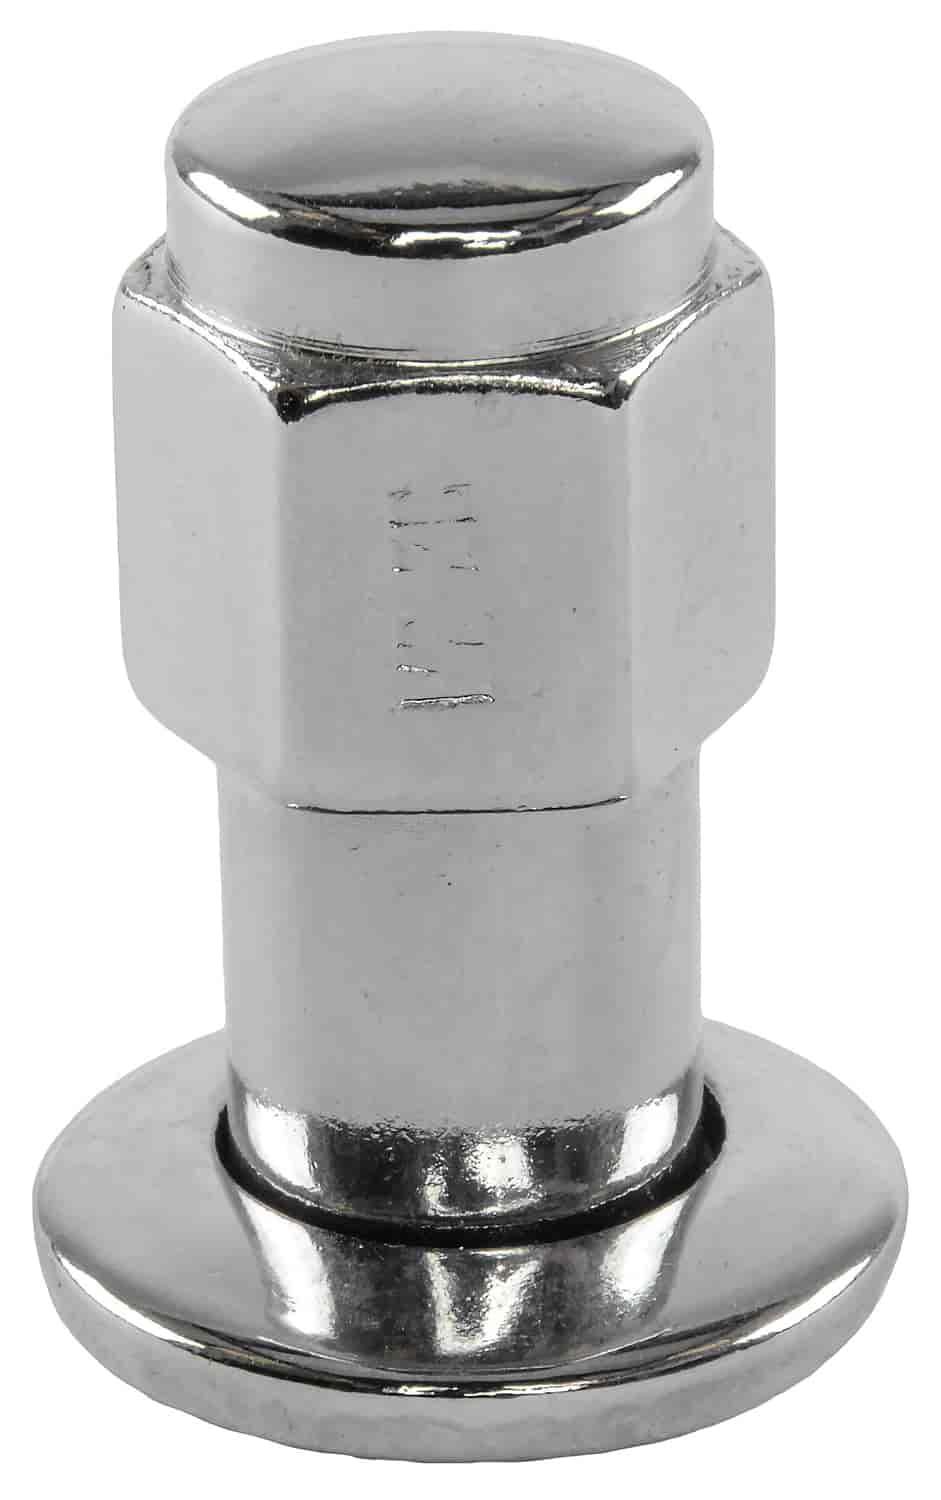 JEGS 65234: Standard Mag Lug Nuts Closed-End 1/2 in.-20 RH Thread  13/16 in. Hex 1.750 in. Long .850 in. Shank Length .680 in. Shank  Diameter Steel Chrome Finish Set of Includes Round Off-Center  Washers JEGS